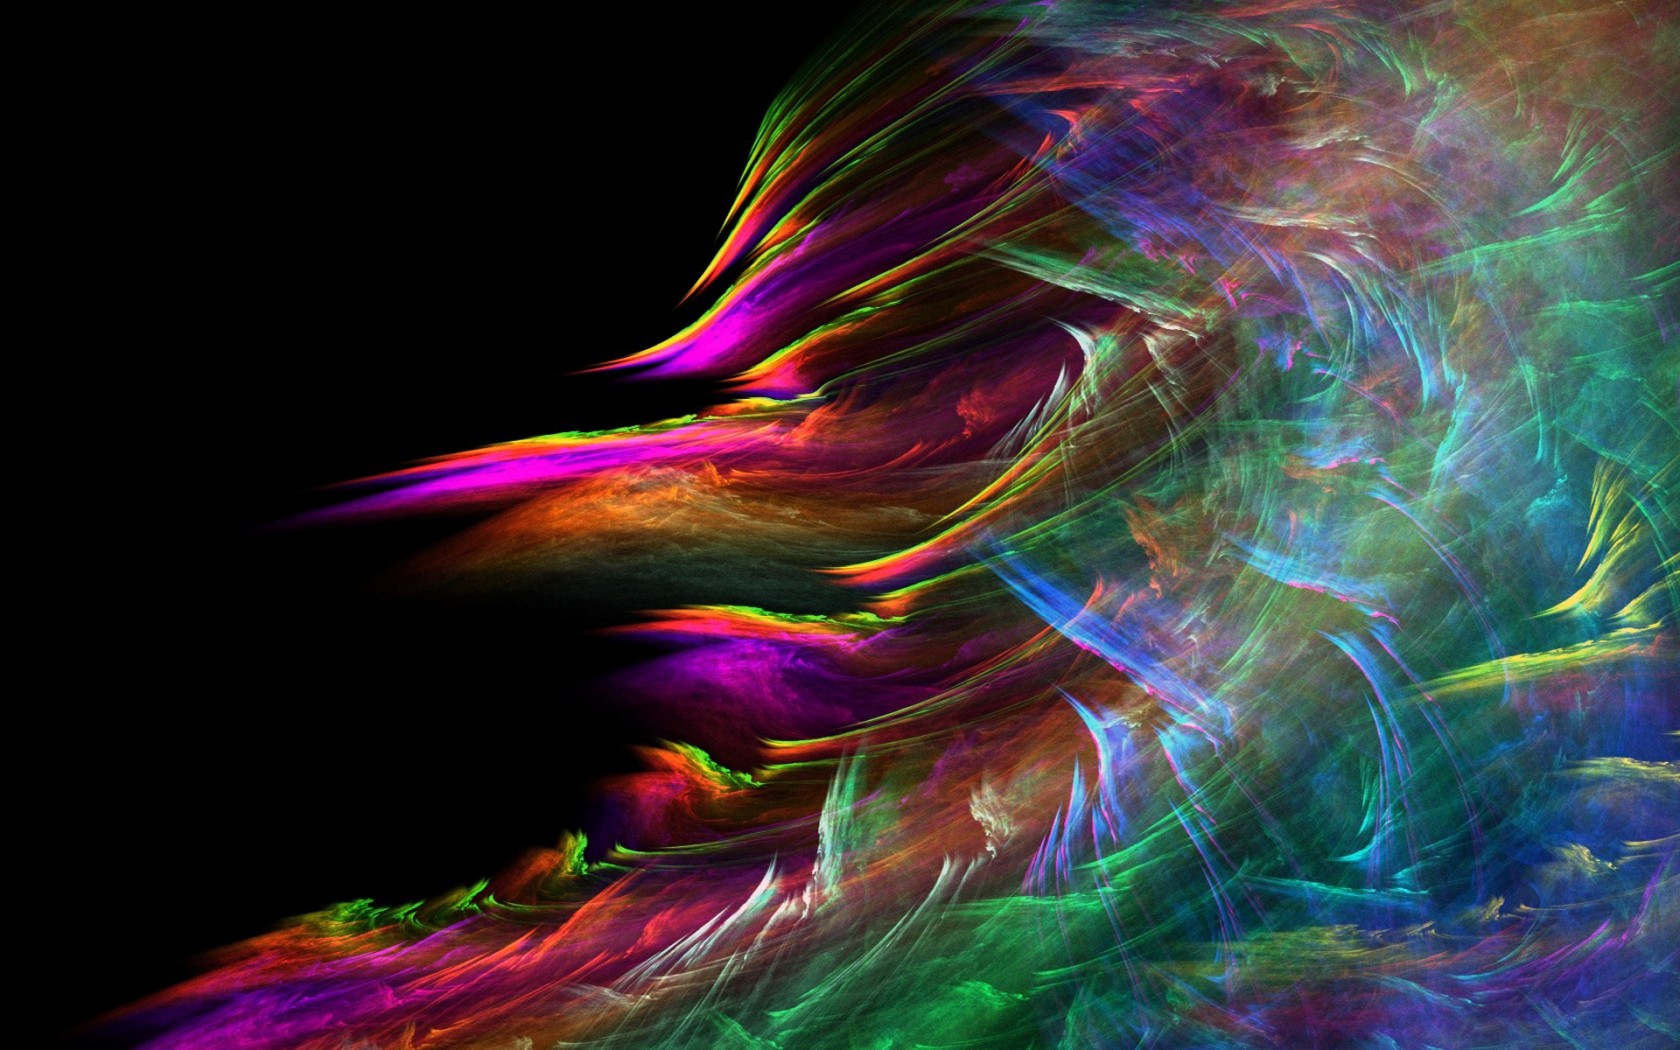  HQ Abstract Abstract 1680x1050 Wallpaper   HQ Wallpapers 1680x1050